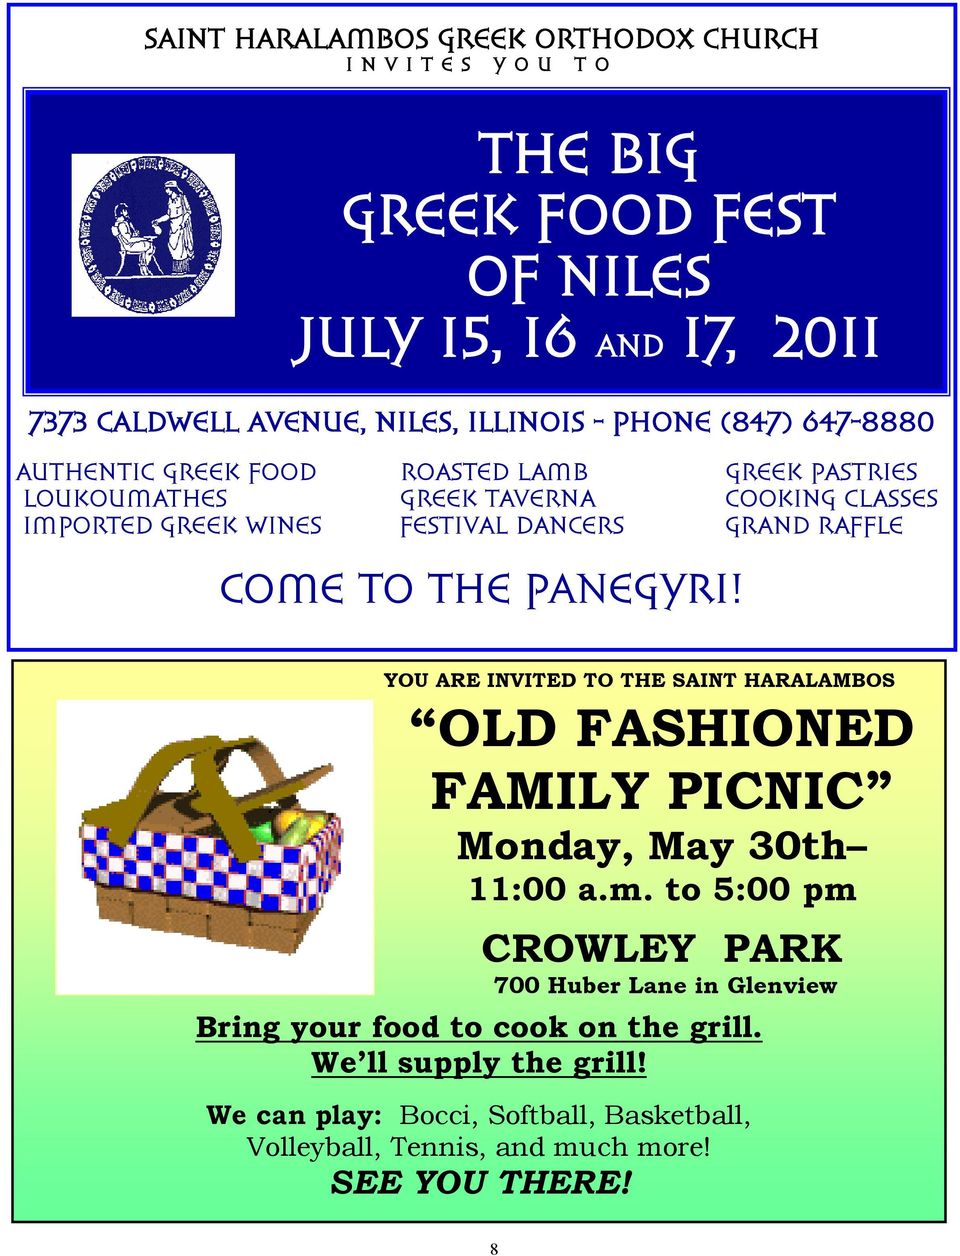 COME TO THE PANEGYRI! YOU ARE INVITED TO THE SAINT HARALAMBOS OLD FASHIONED FAMILY PICNIC Monday, May 30th 11:00 a.m.